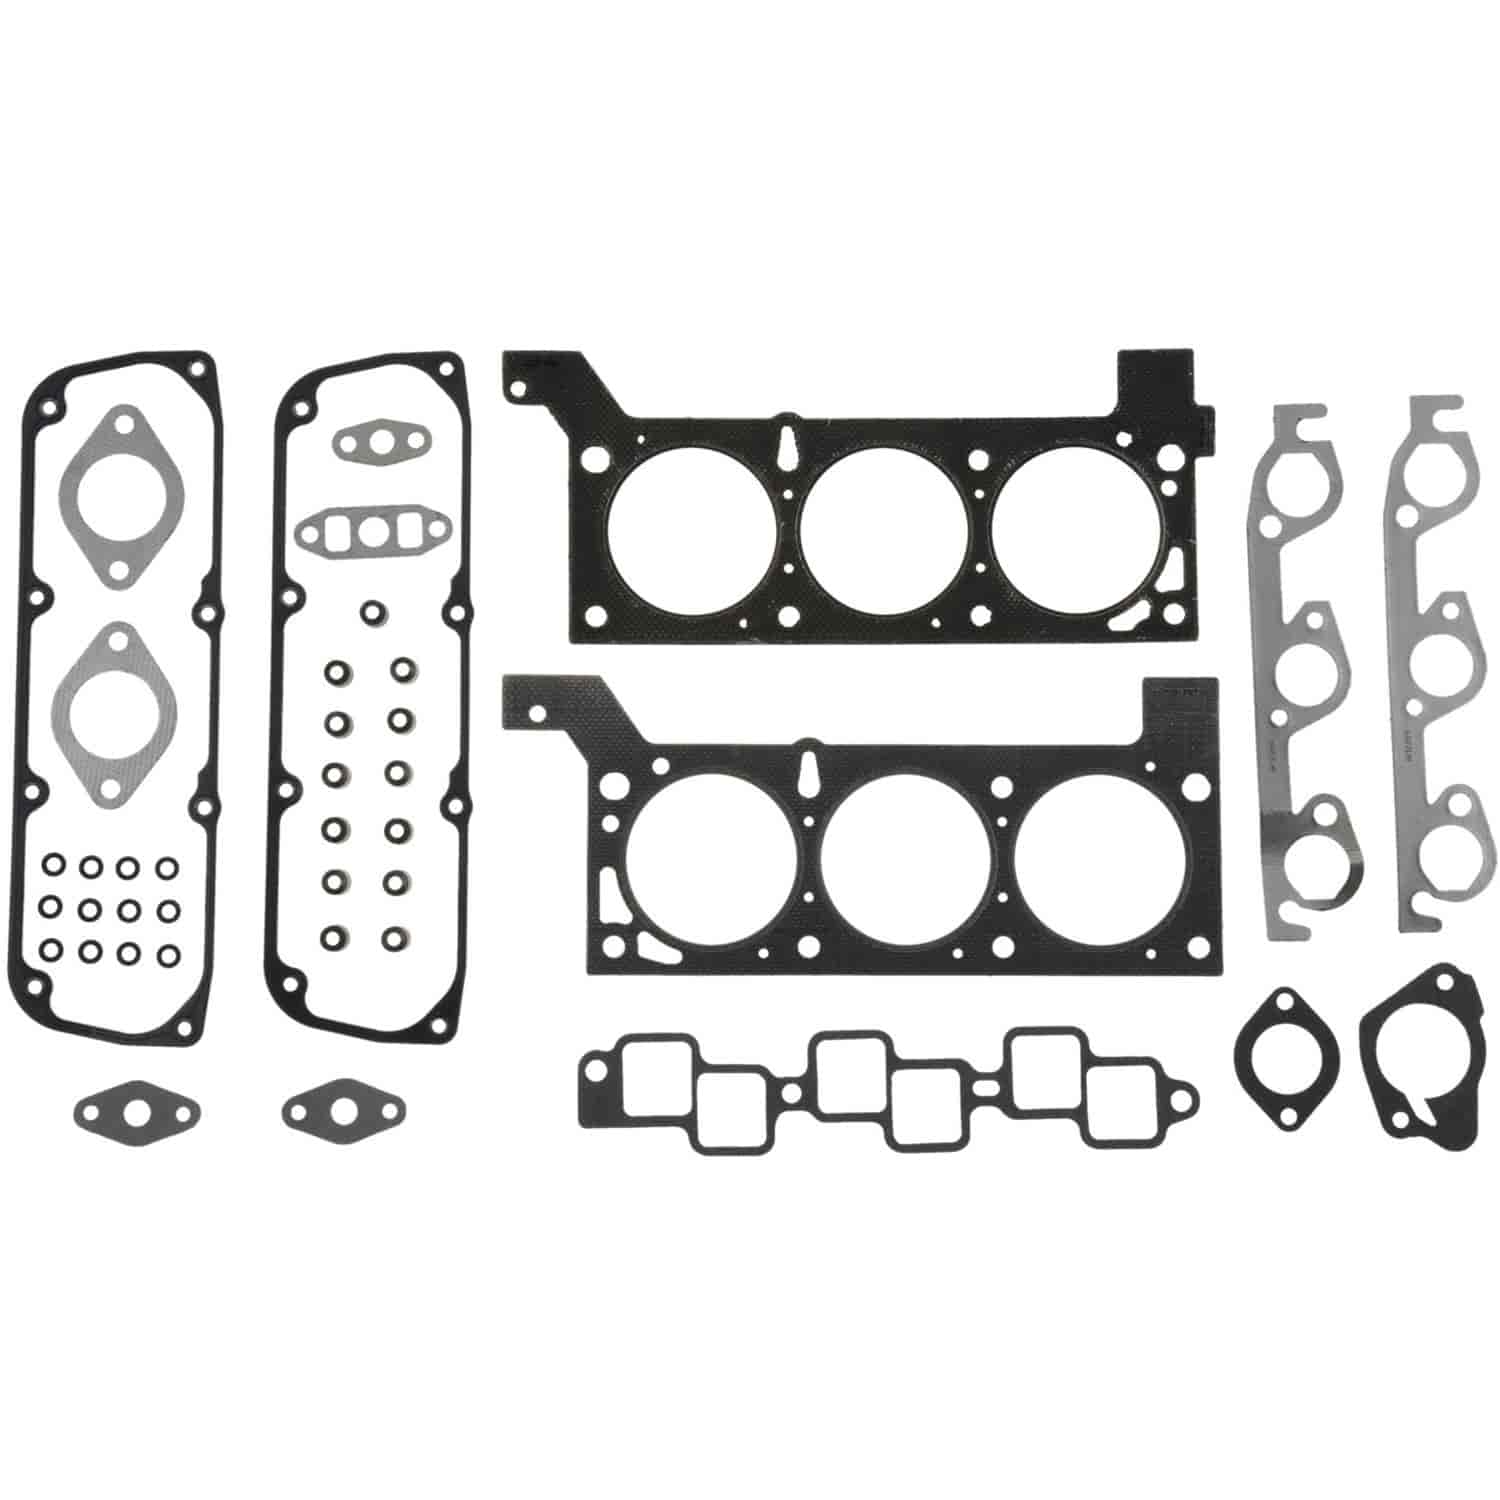 Head Set Dodge Truck 3.8L 2000 Exc. Isolated Valve Cover Gaskets